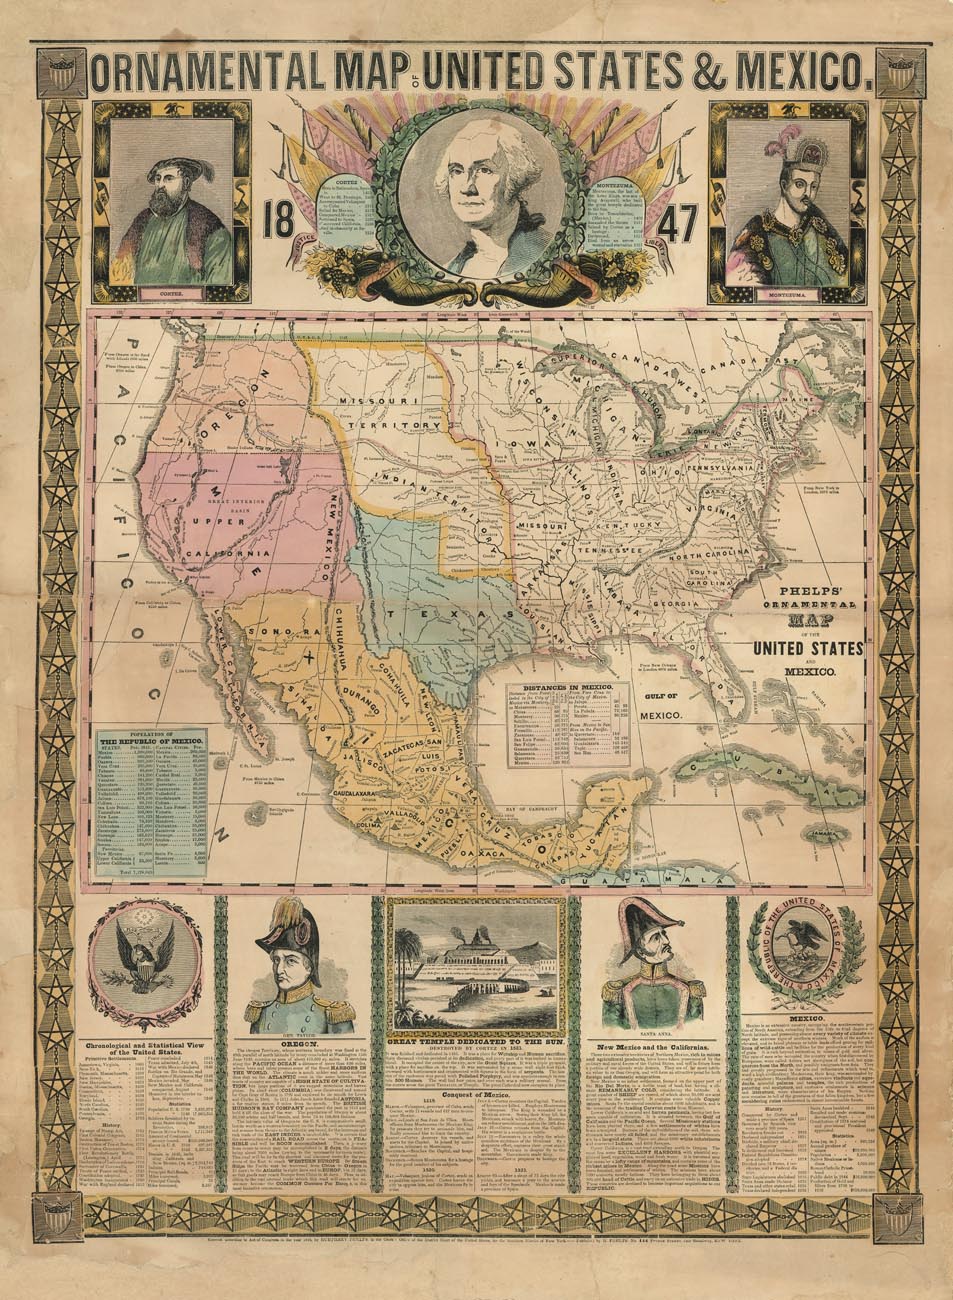 (US.) Ornamental Map of United States & Mexico